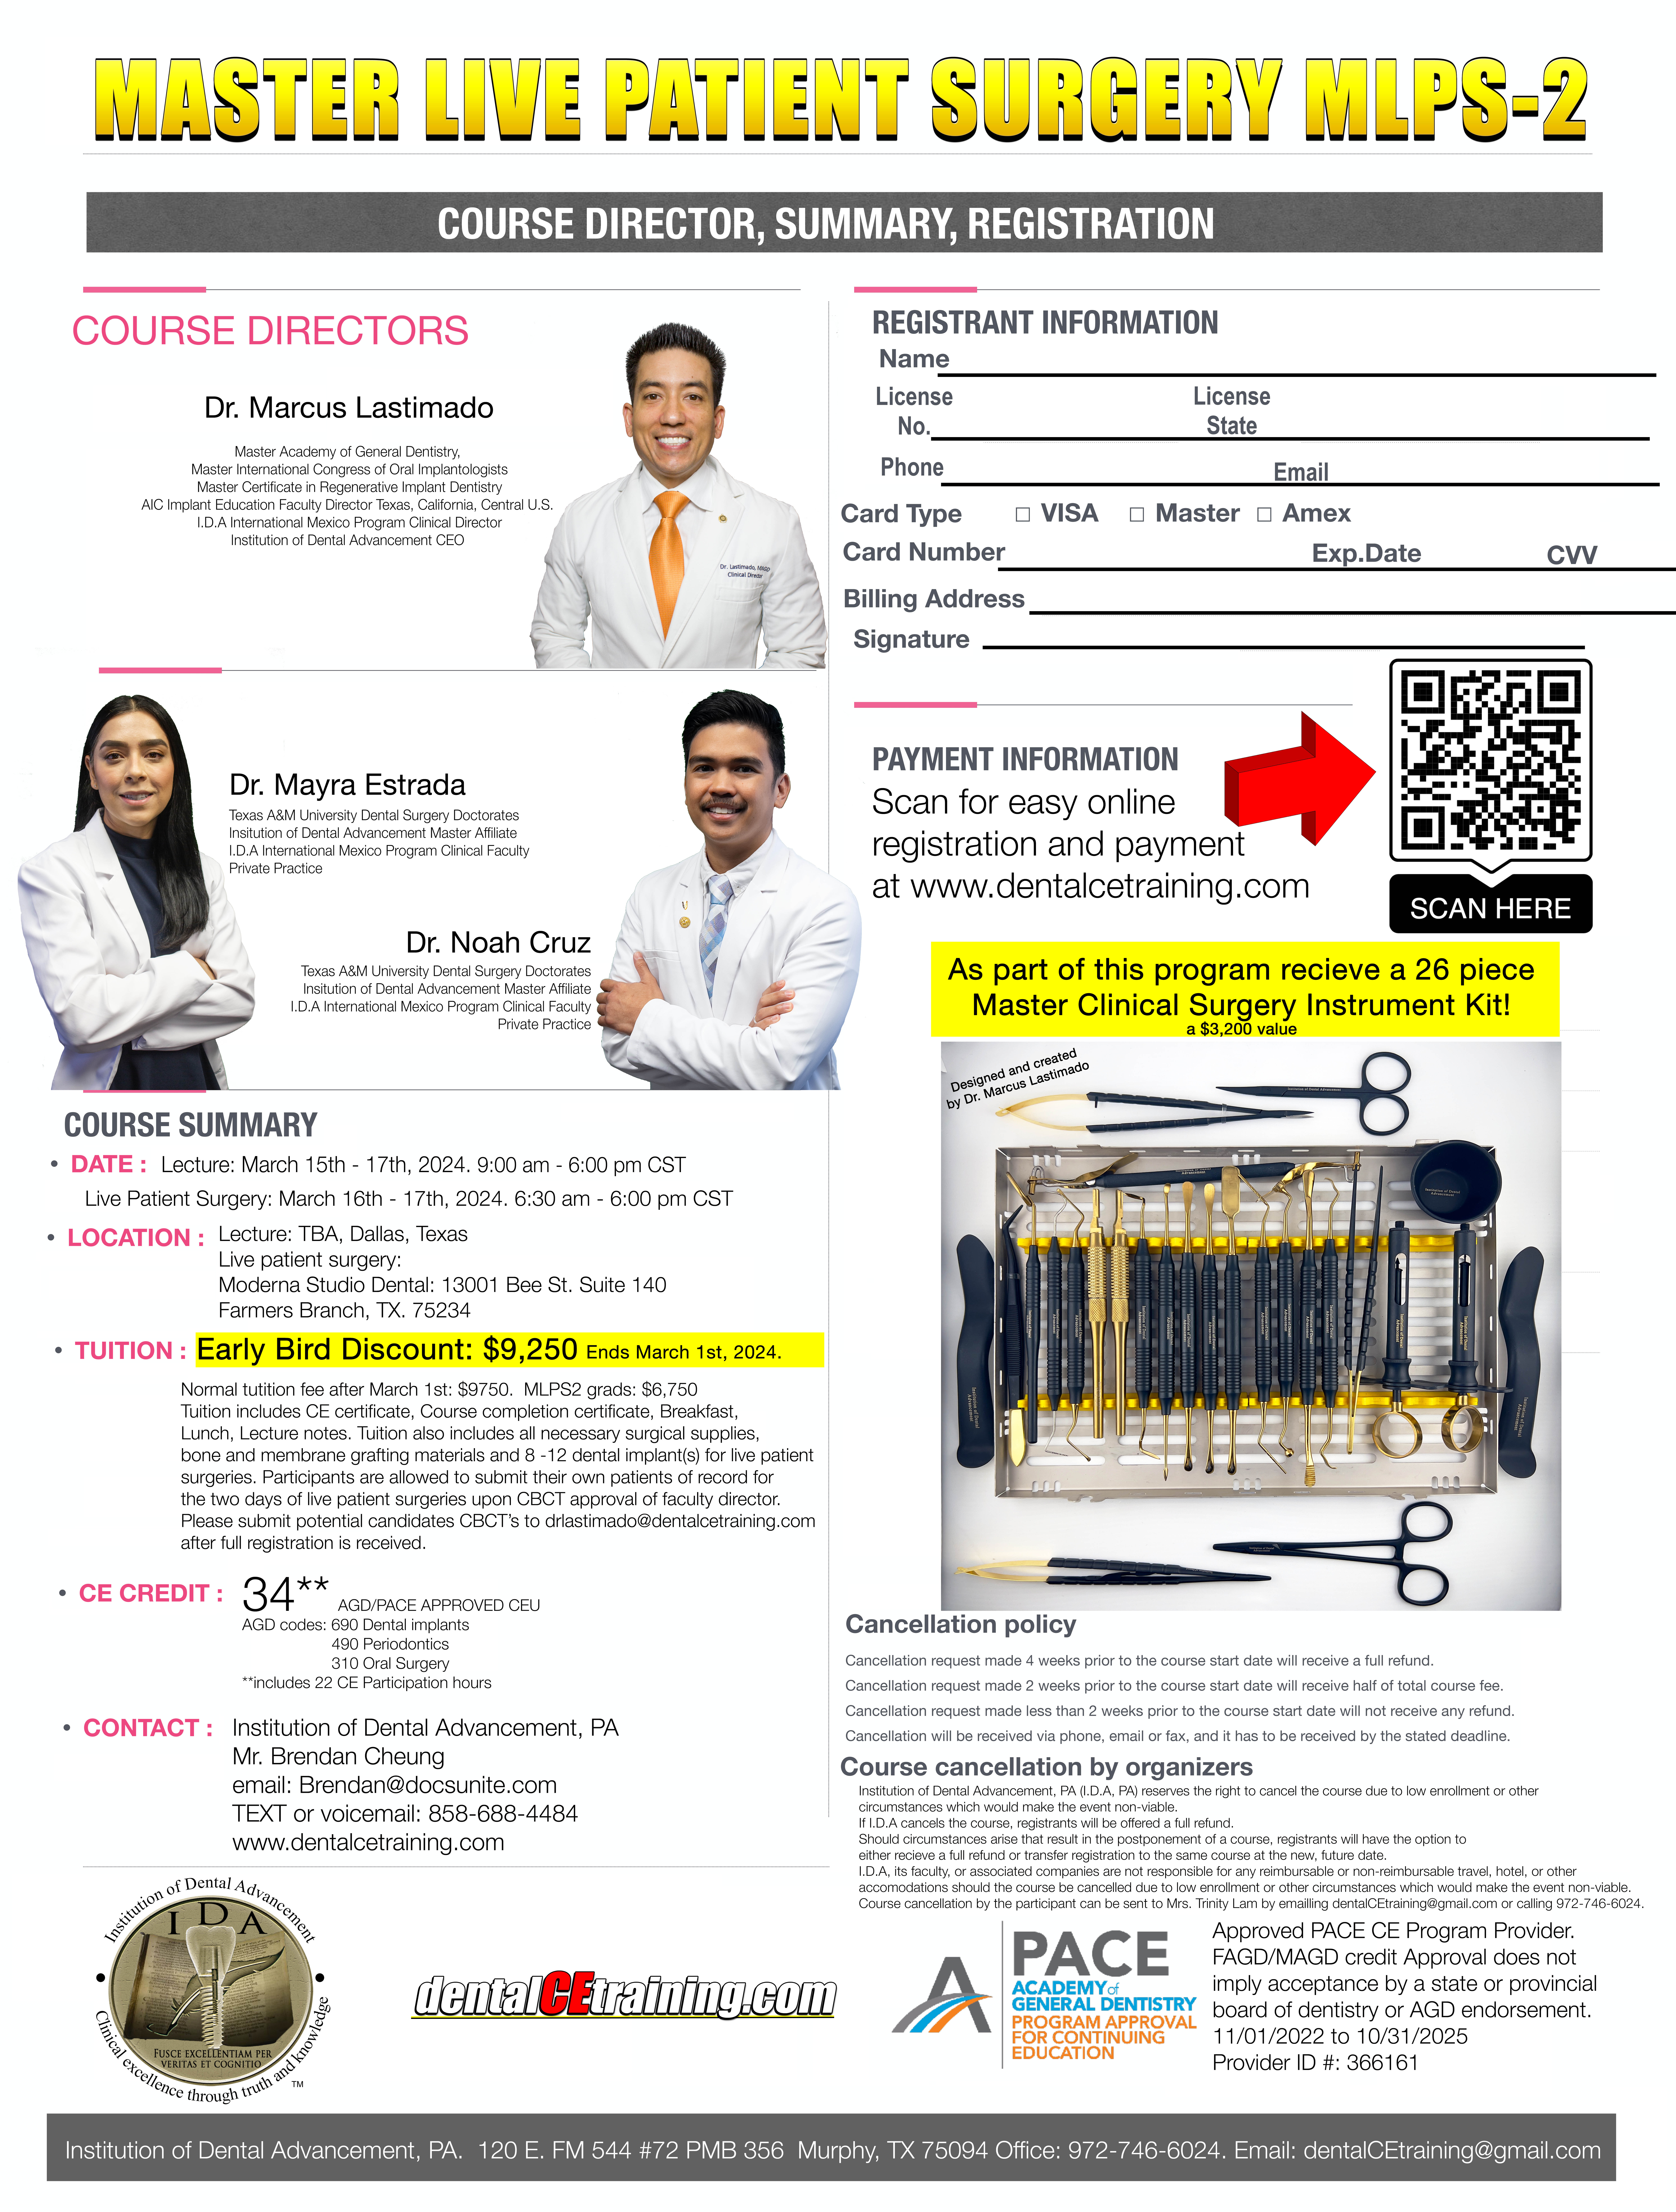 Dental implant surgical training course Dallas Texas